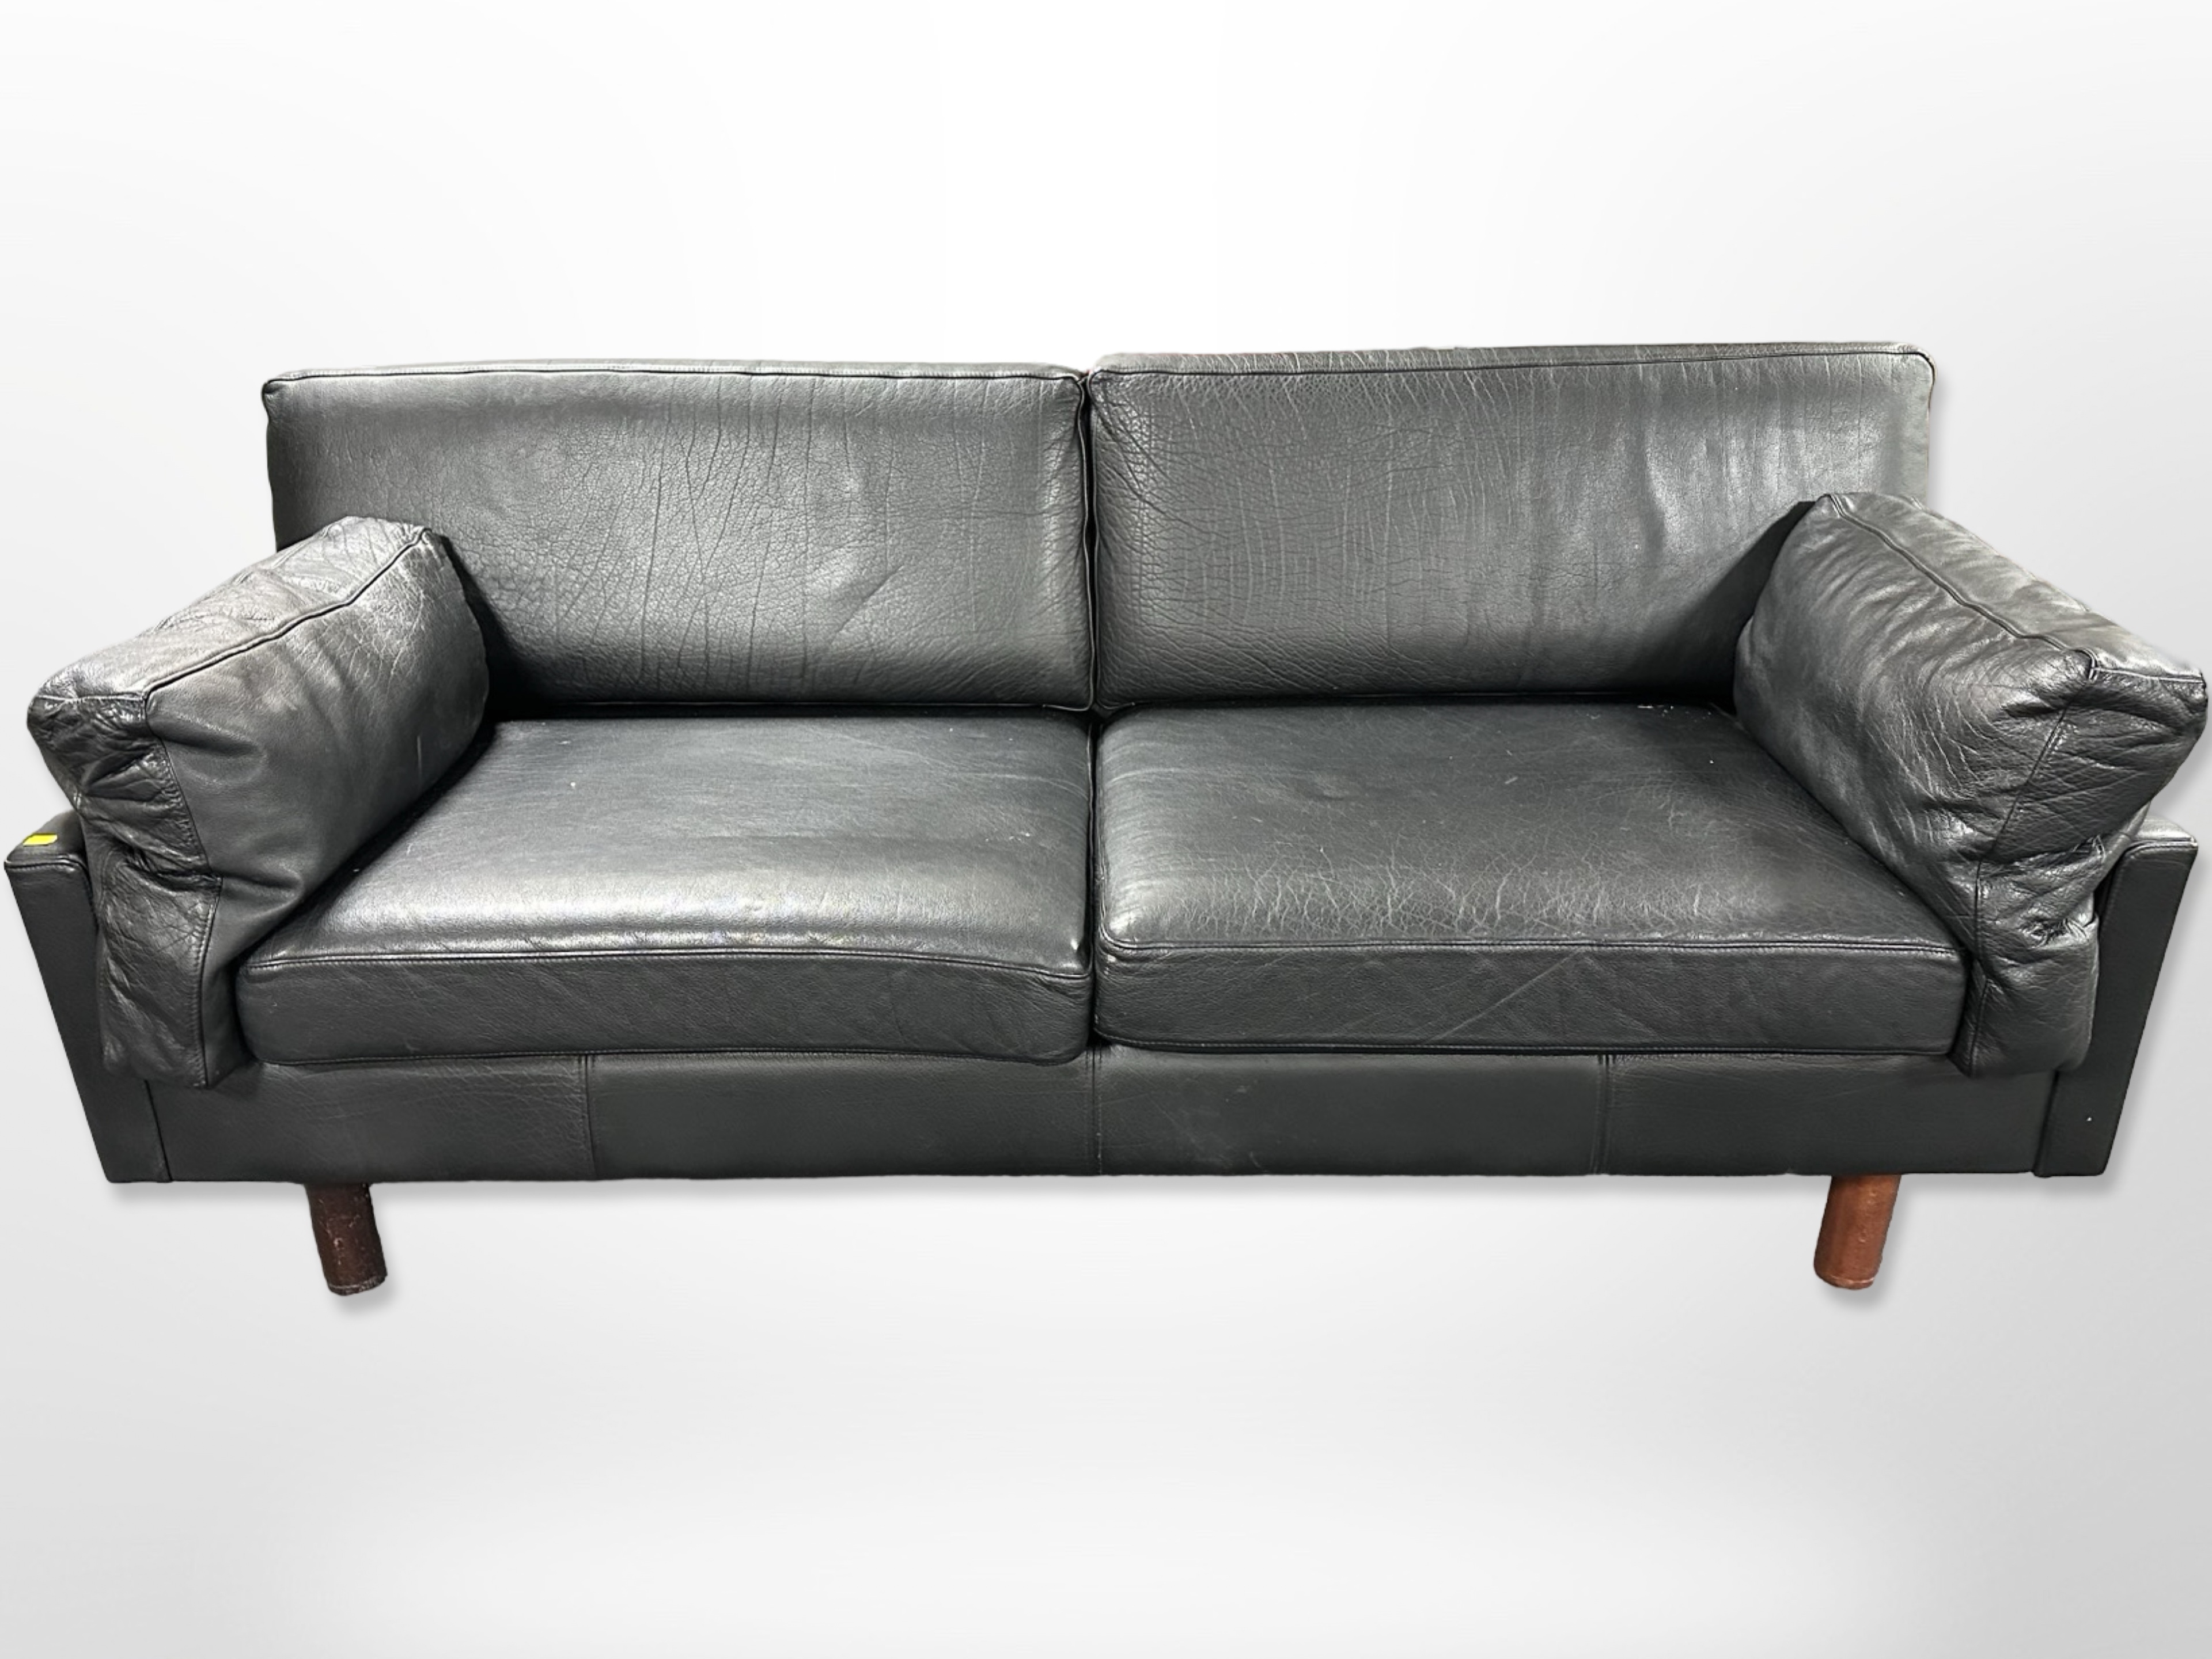 A contemporary Scandinavian black stitched leather three-seater settee,